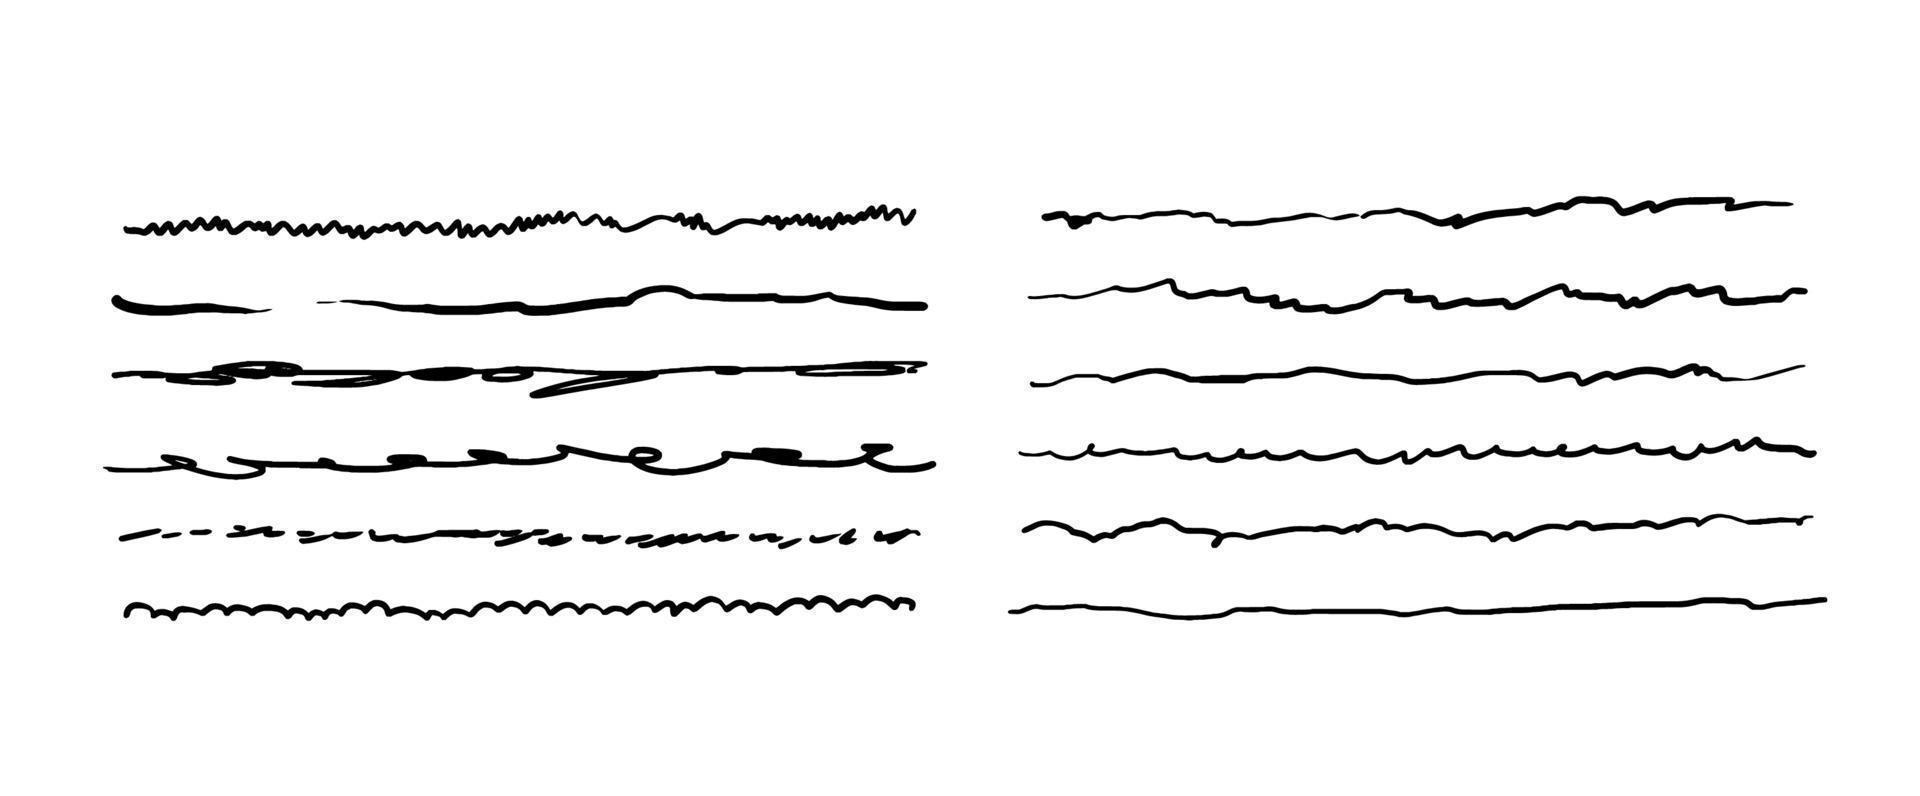 Hand-drawn doodle lines. A set of quivering underlines. Vector illustration of graphic elements for highlight, underline, borders.